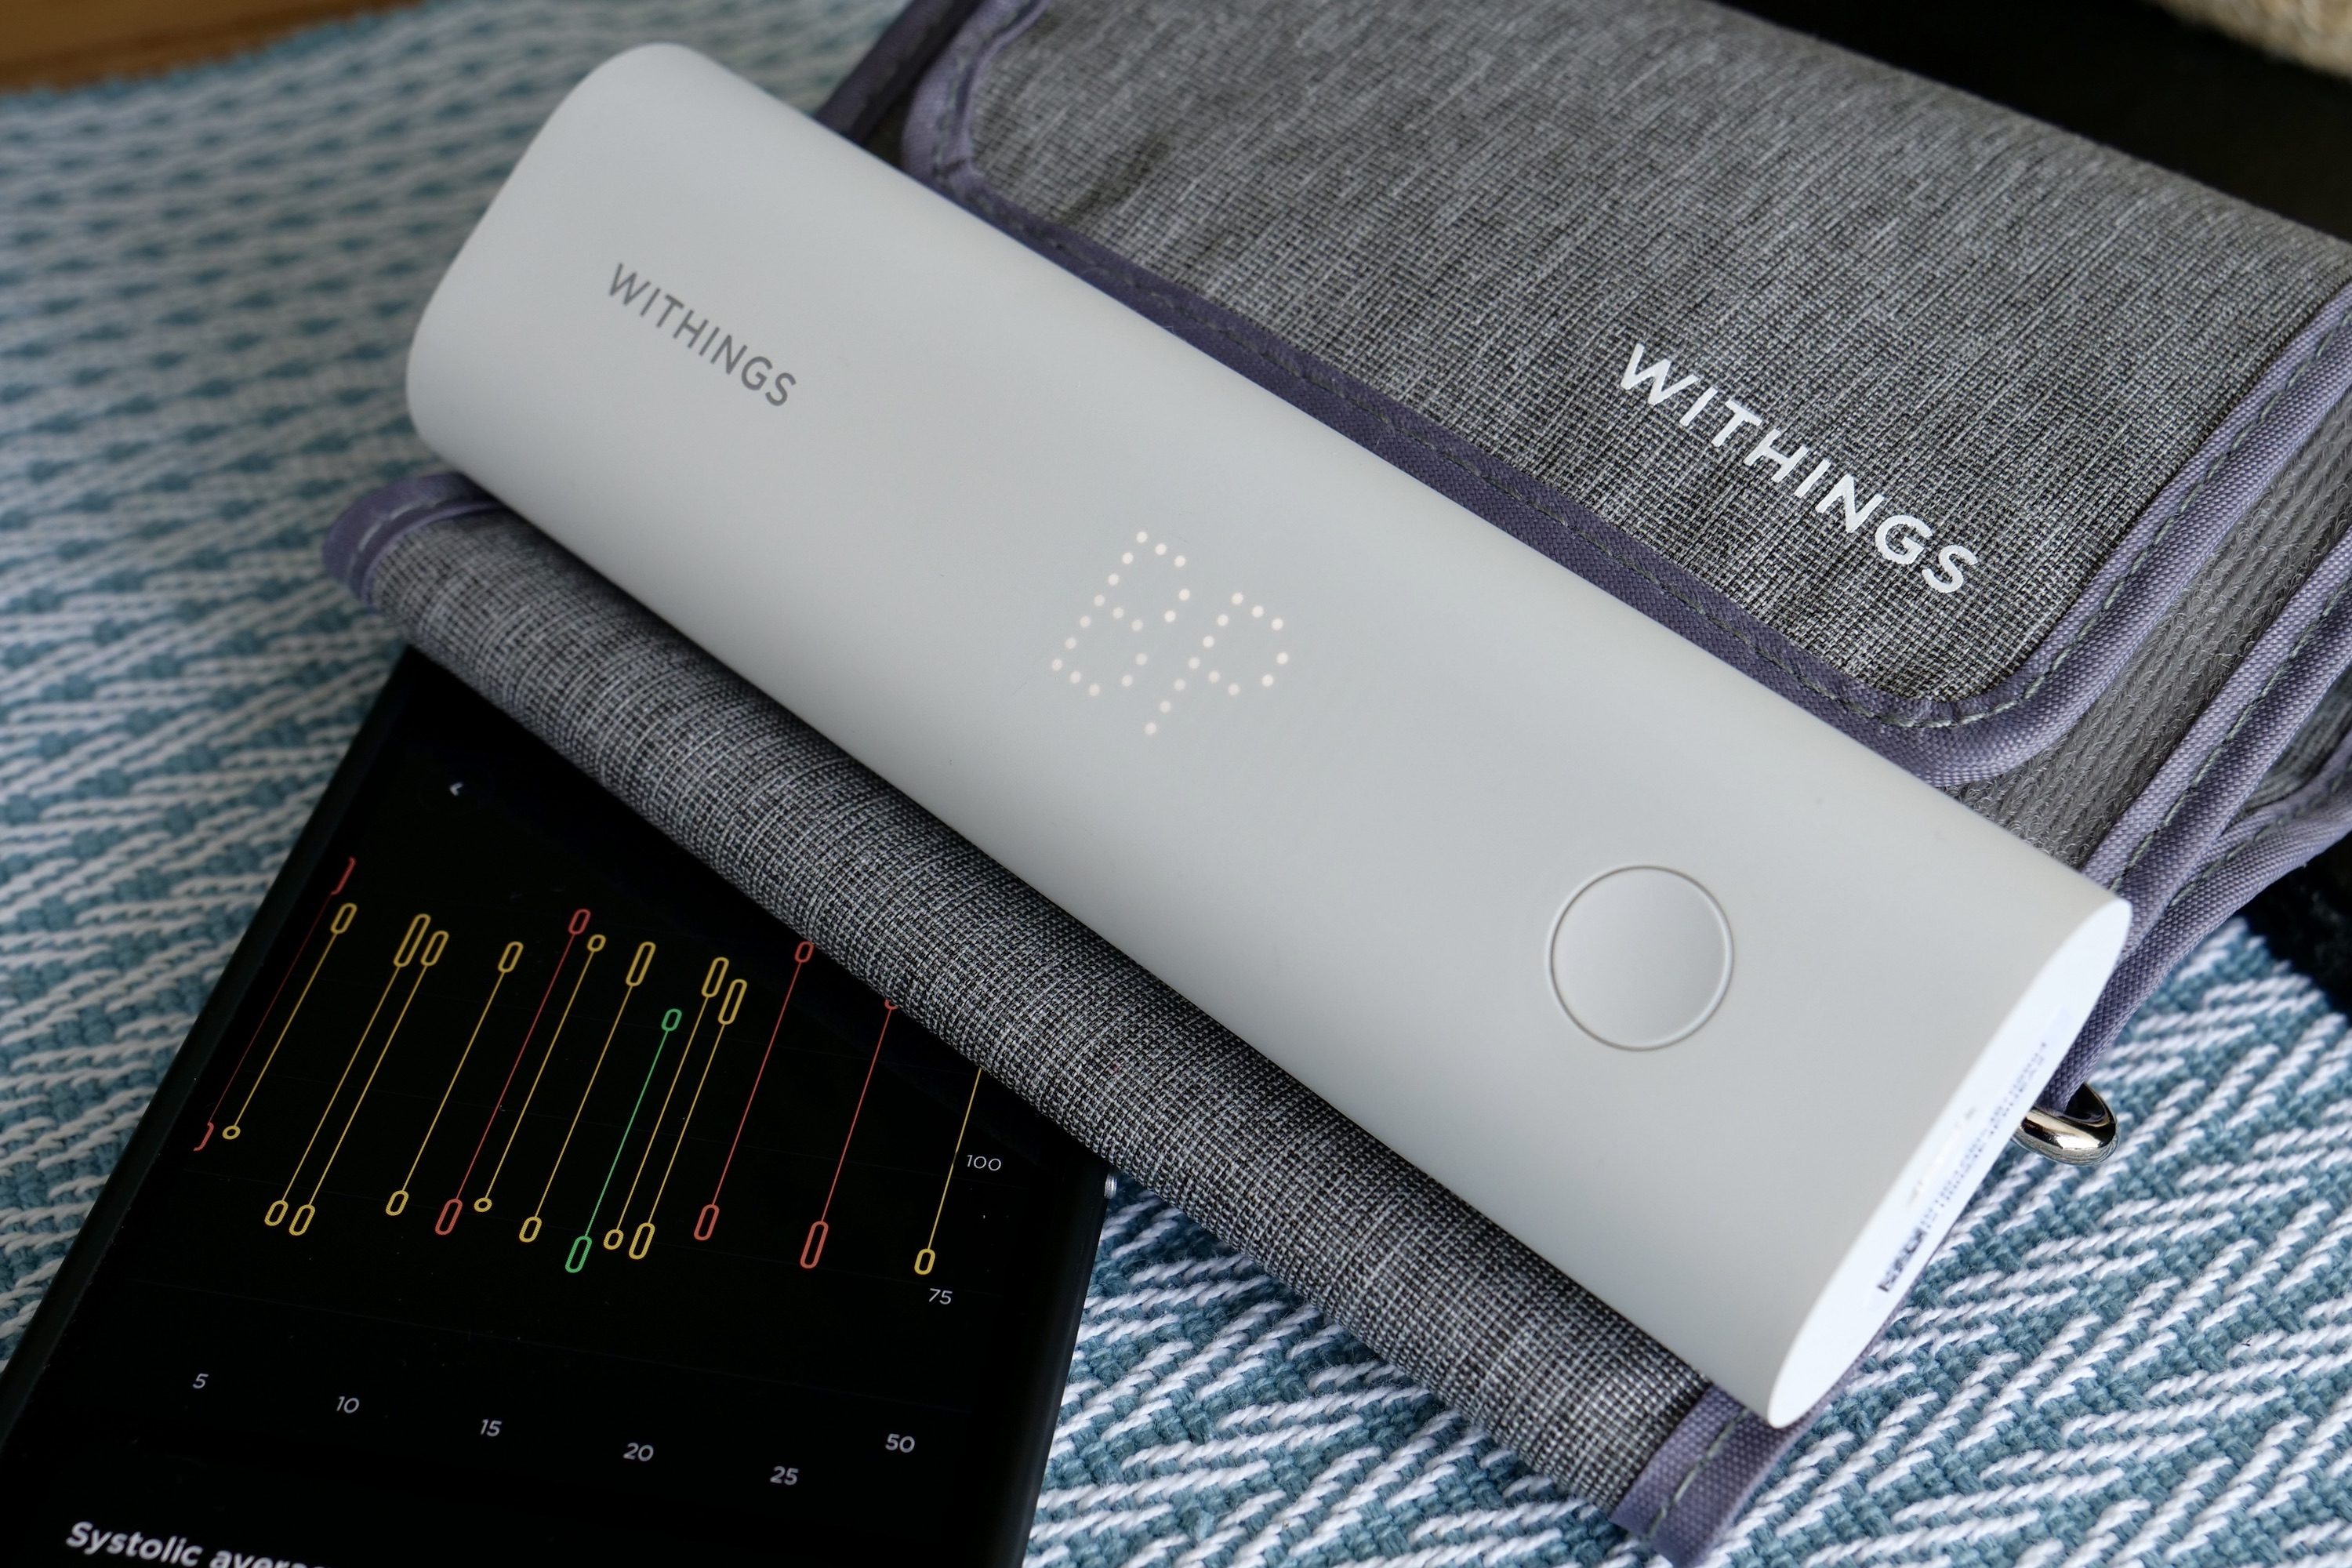 https://www.digitaltrends.com/wp-content/uploads/2023/05/Withings-BPM-Connect-and-App.jpg?p=1